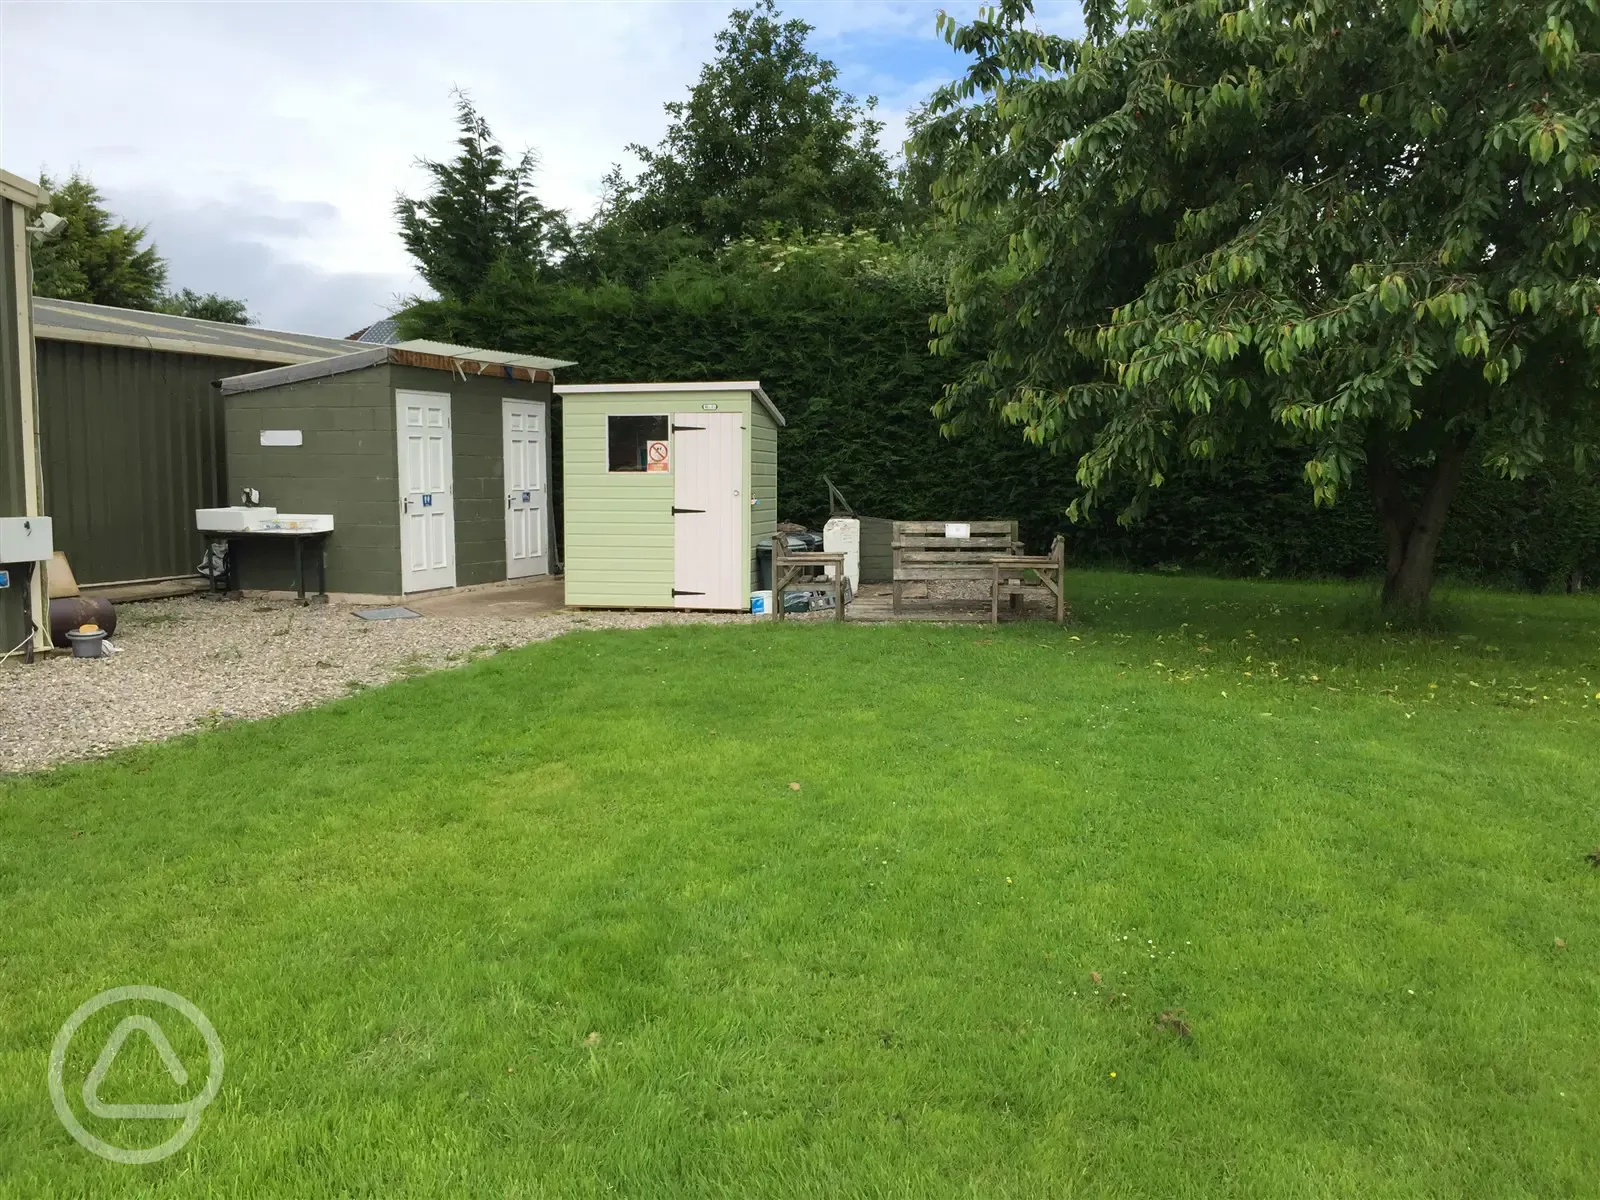 The Shower and Toilet facilities - plus the Information hut.